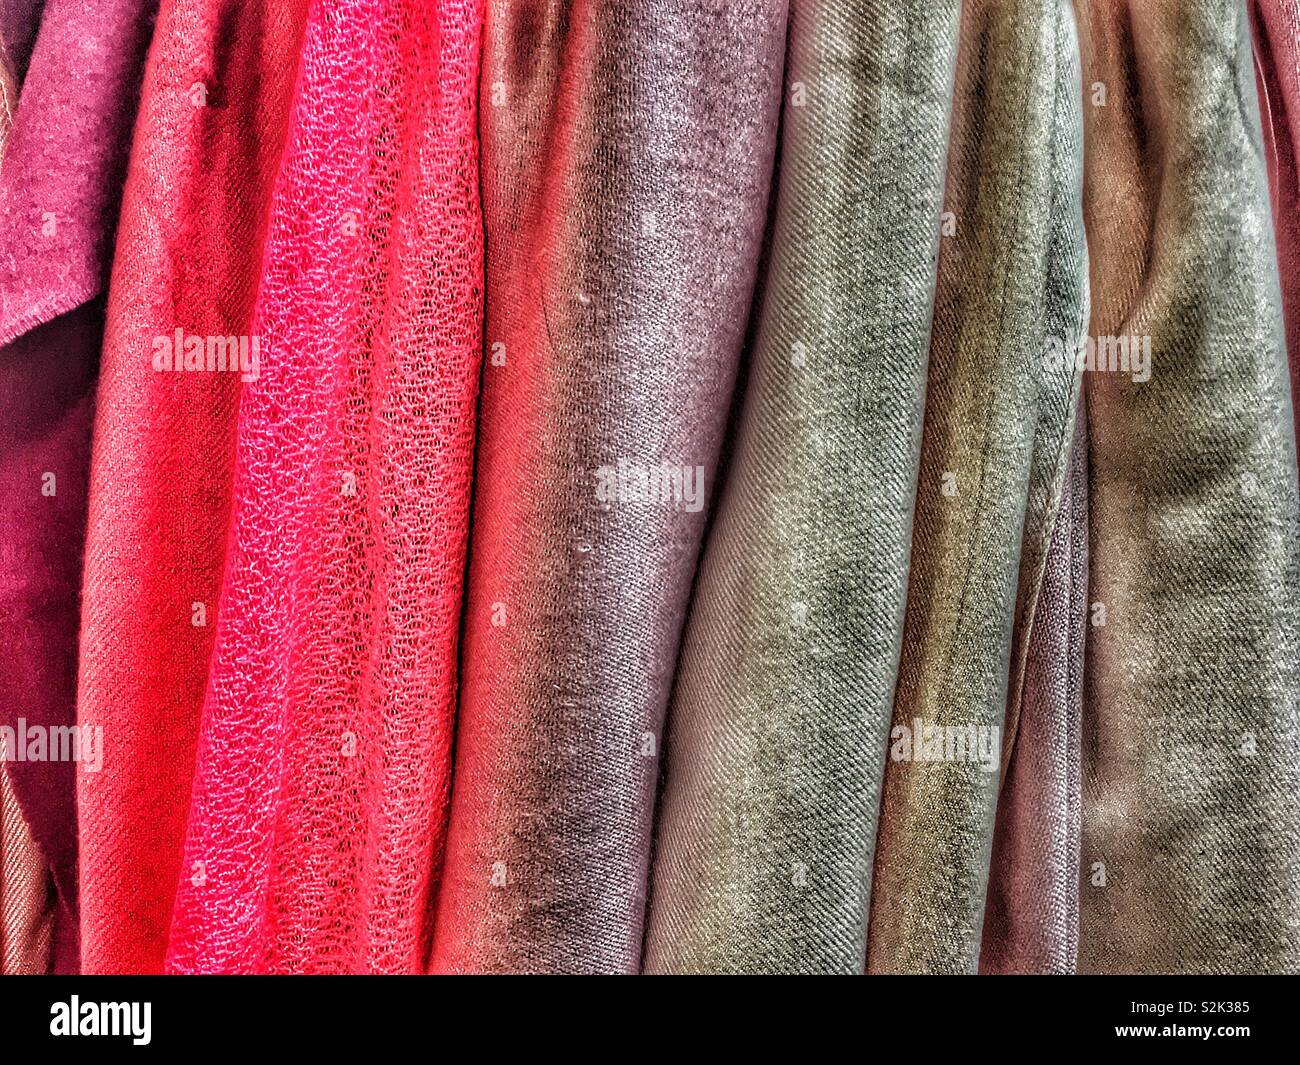 Side view of many fashionable red, purple, and black hued clothes hanging on a clothing rack. Stock Photo